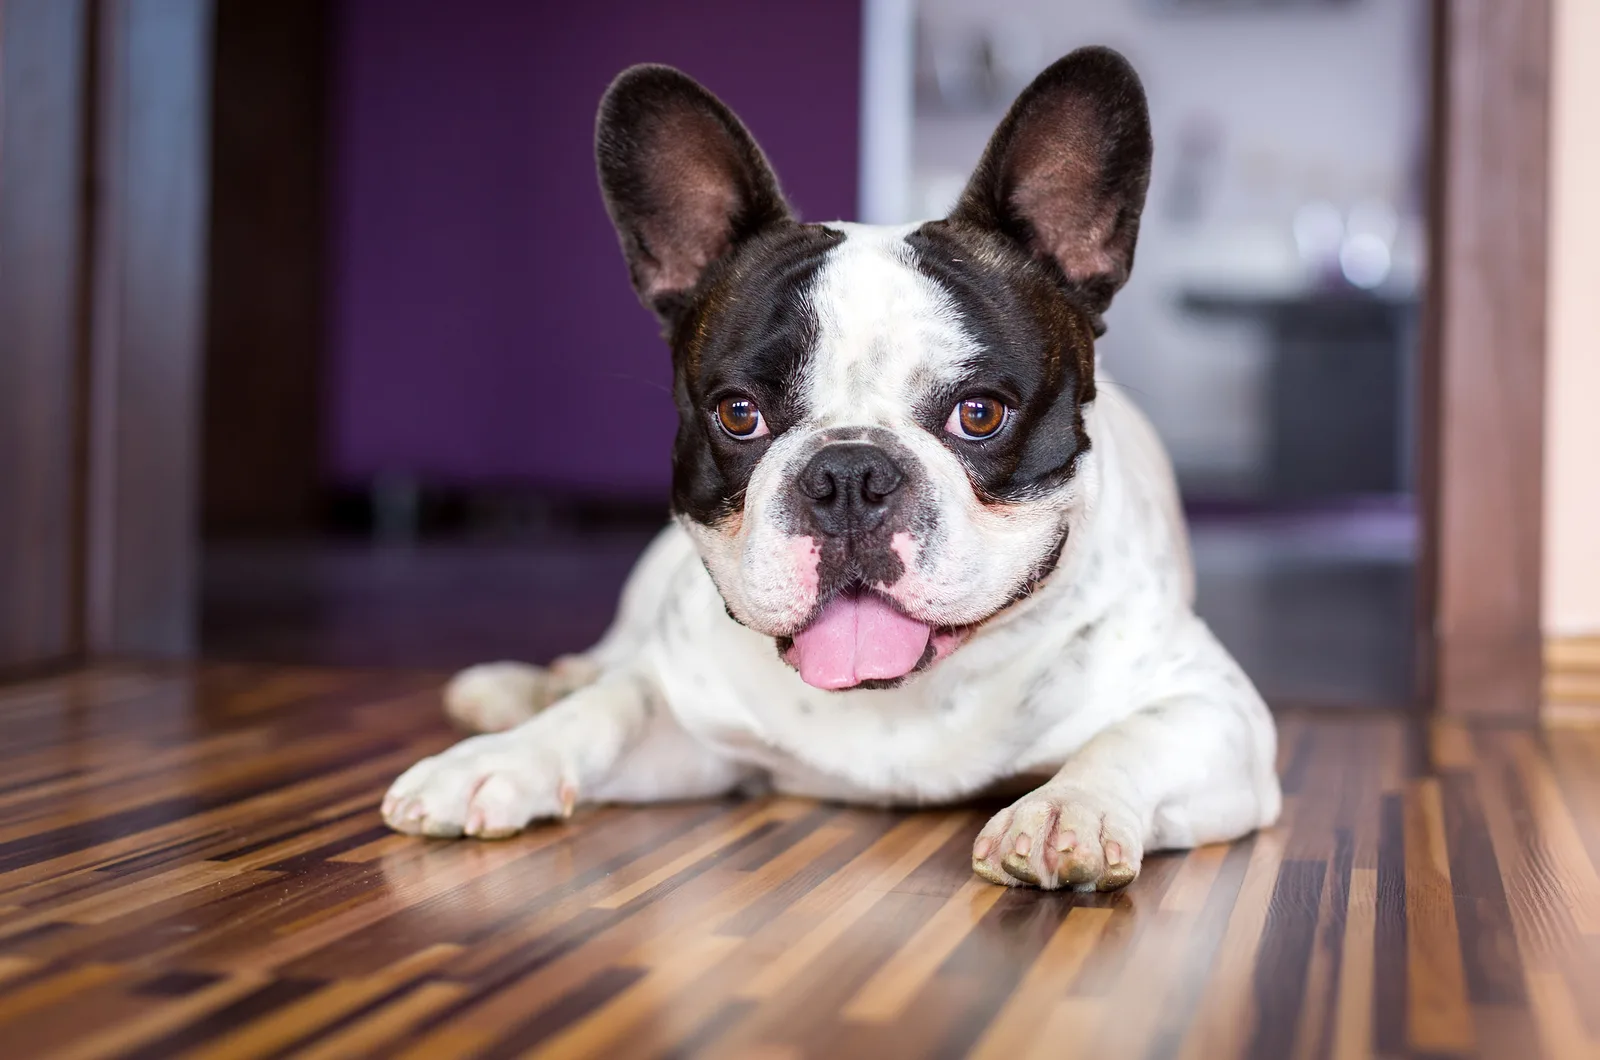 French Bulldog lies down and rests